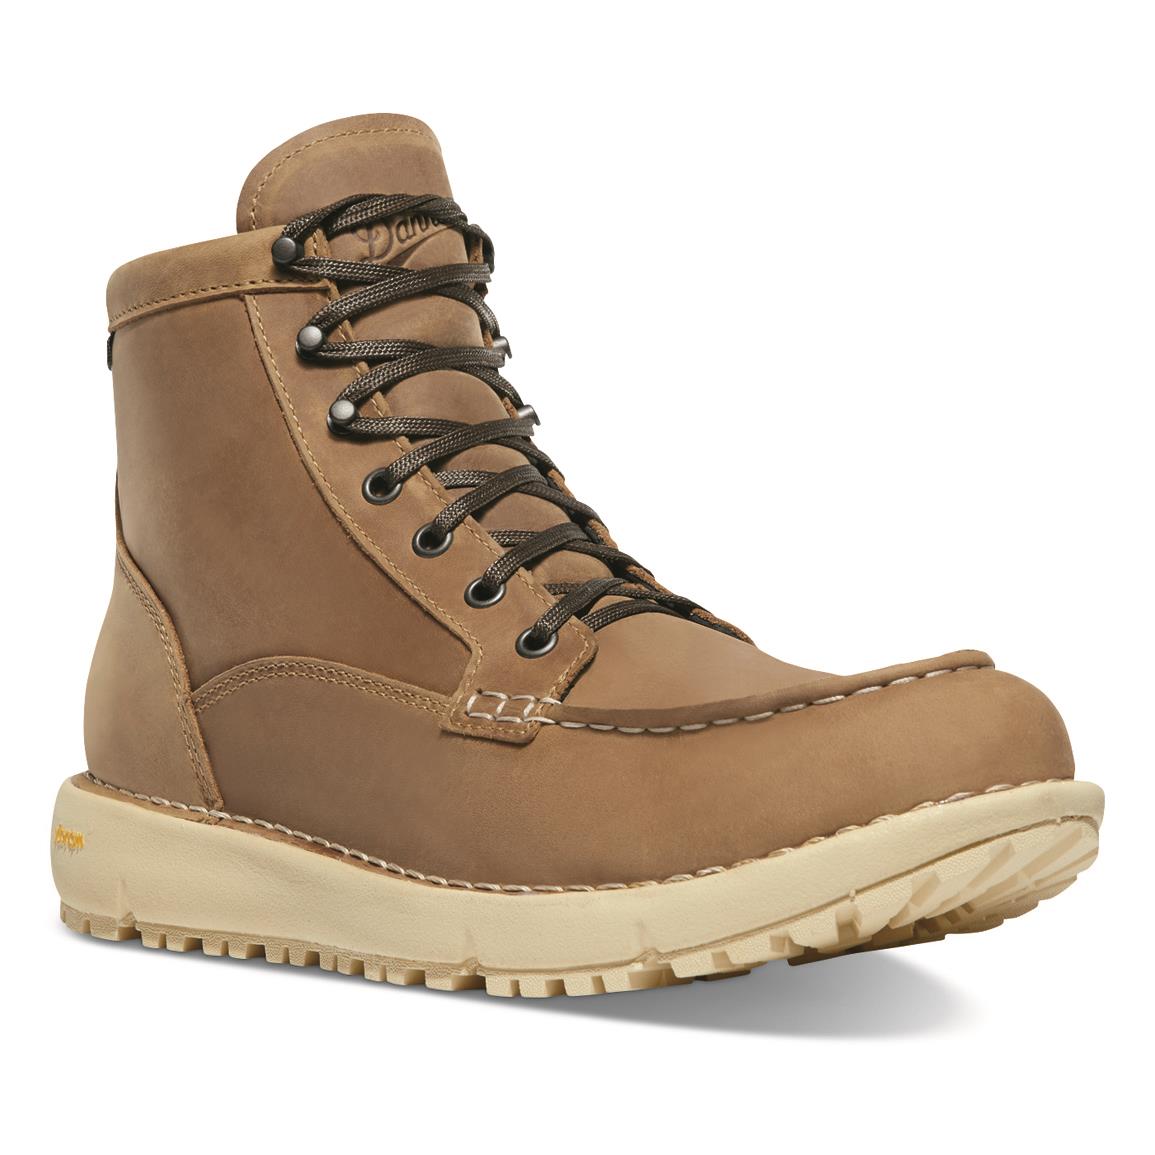 Danner Logger Moc 917 GTX Boots - 731702, Casual Shoes at Sportsman's Guide